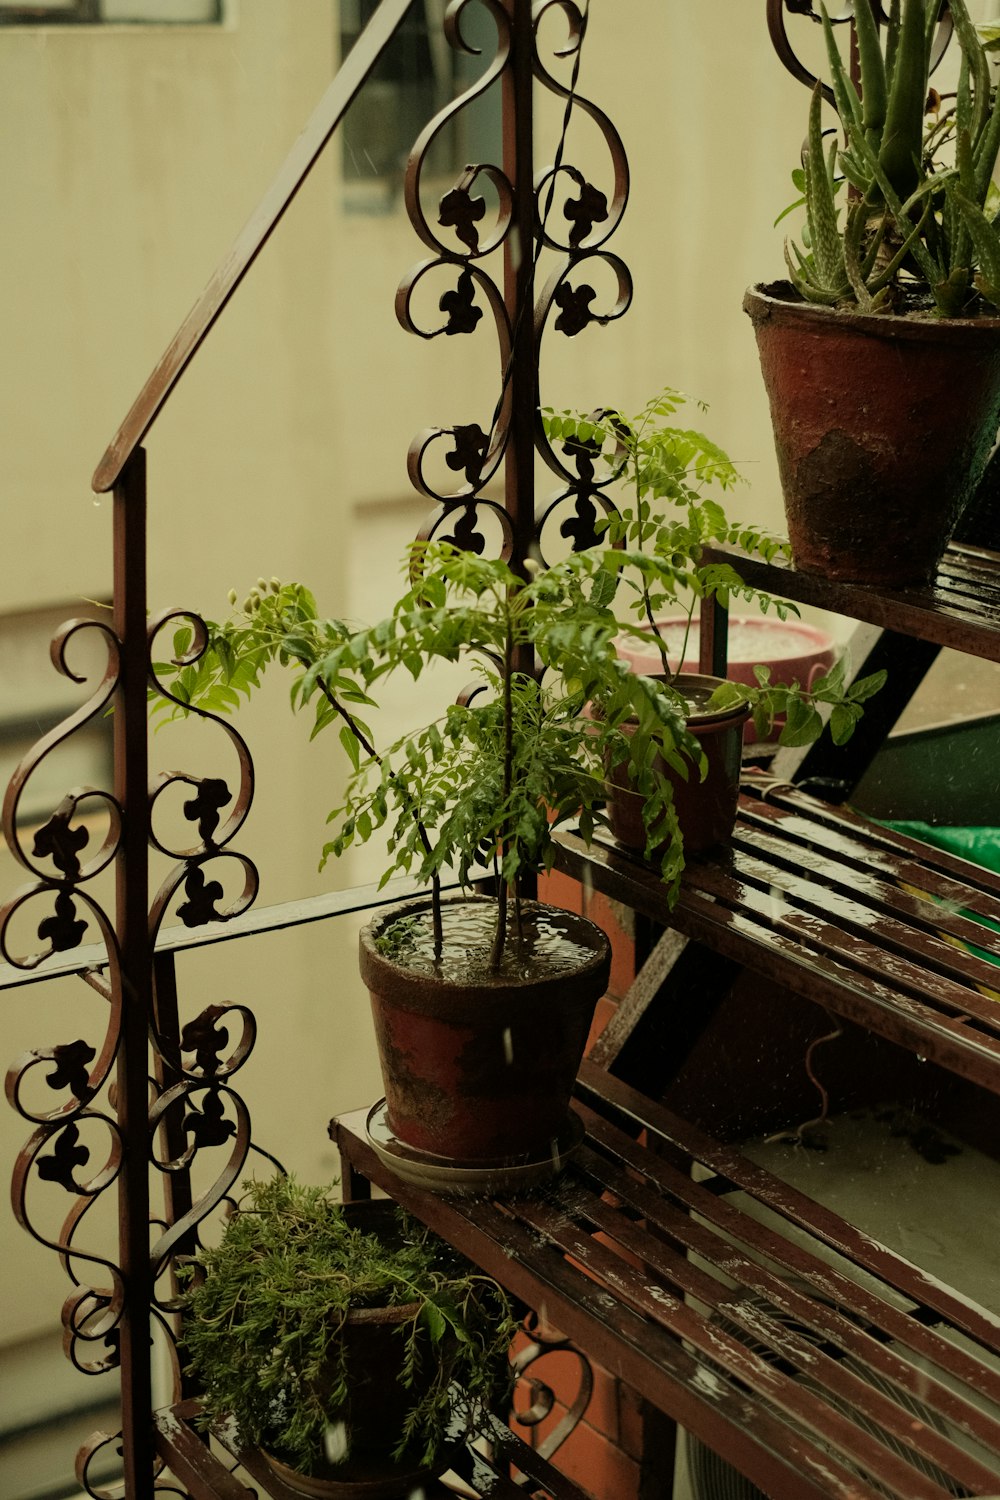 a set of stairs with potted plants on it